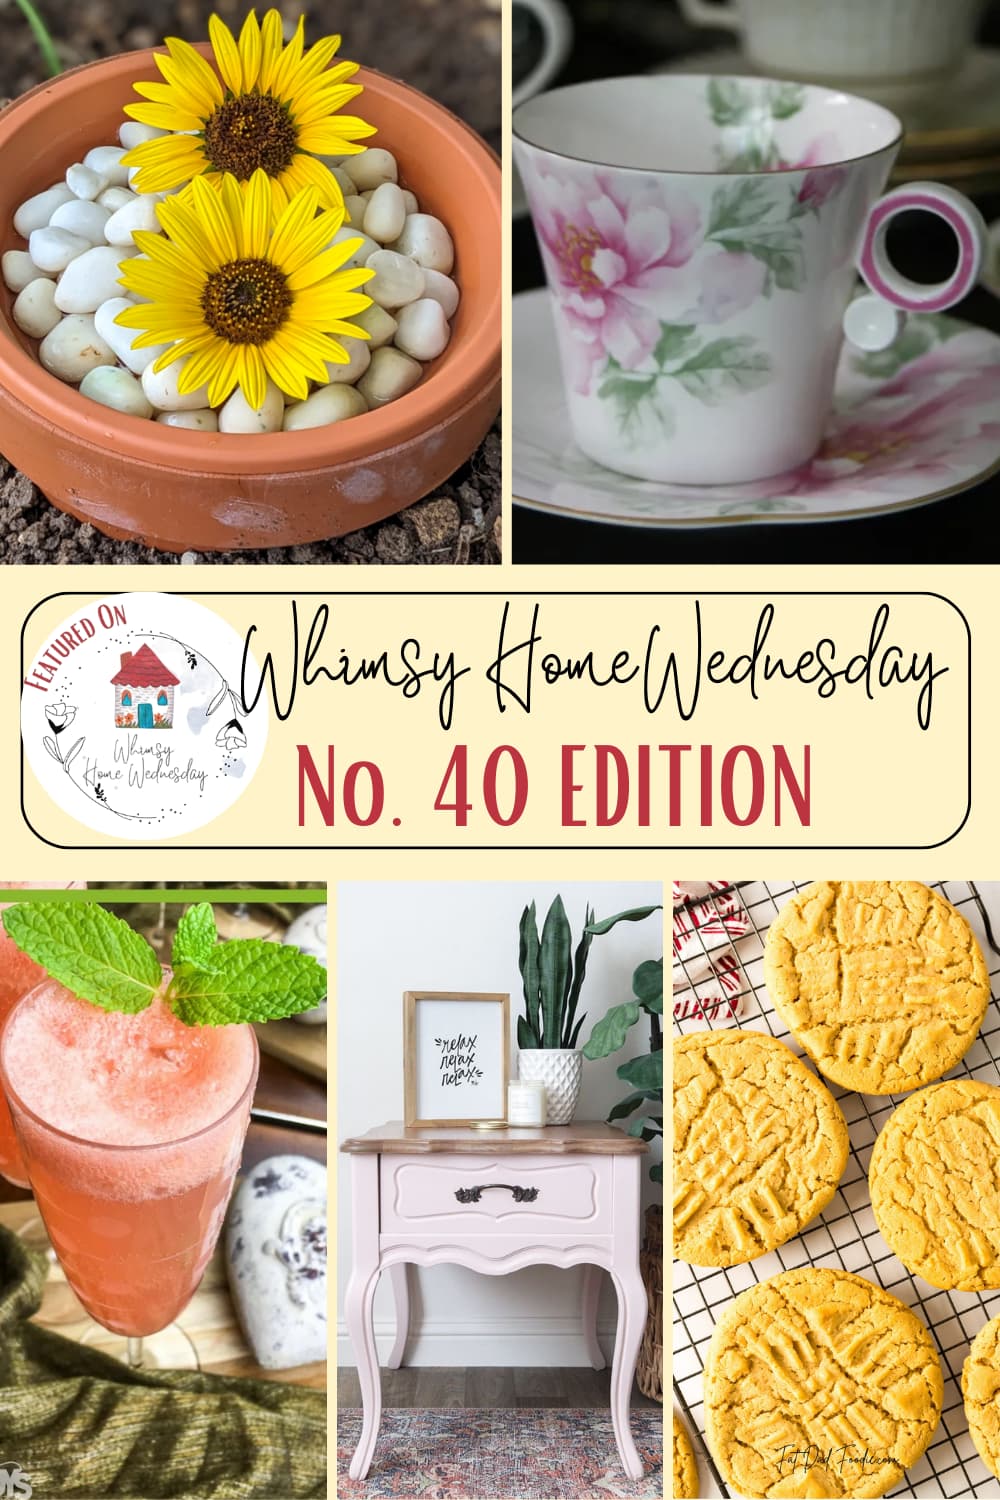 Join us on Whimsy Home Wednesday Blog Link Party No. 40 and see host projects, the features from the previous week and link up your posts!